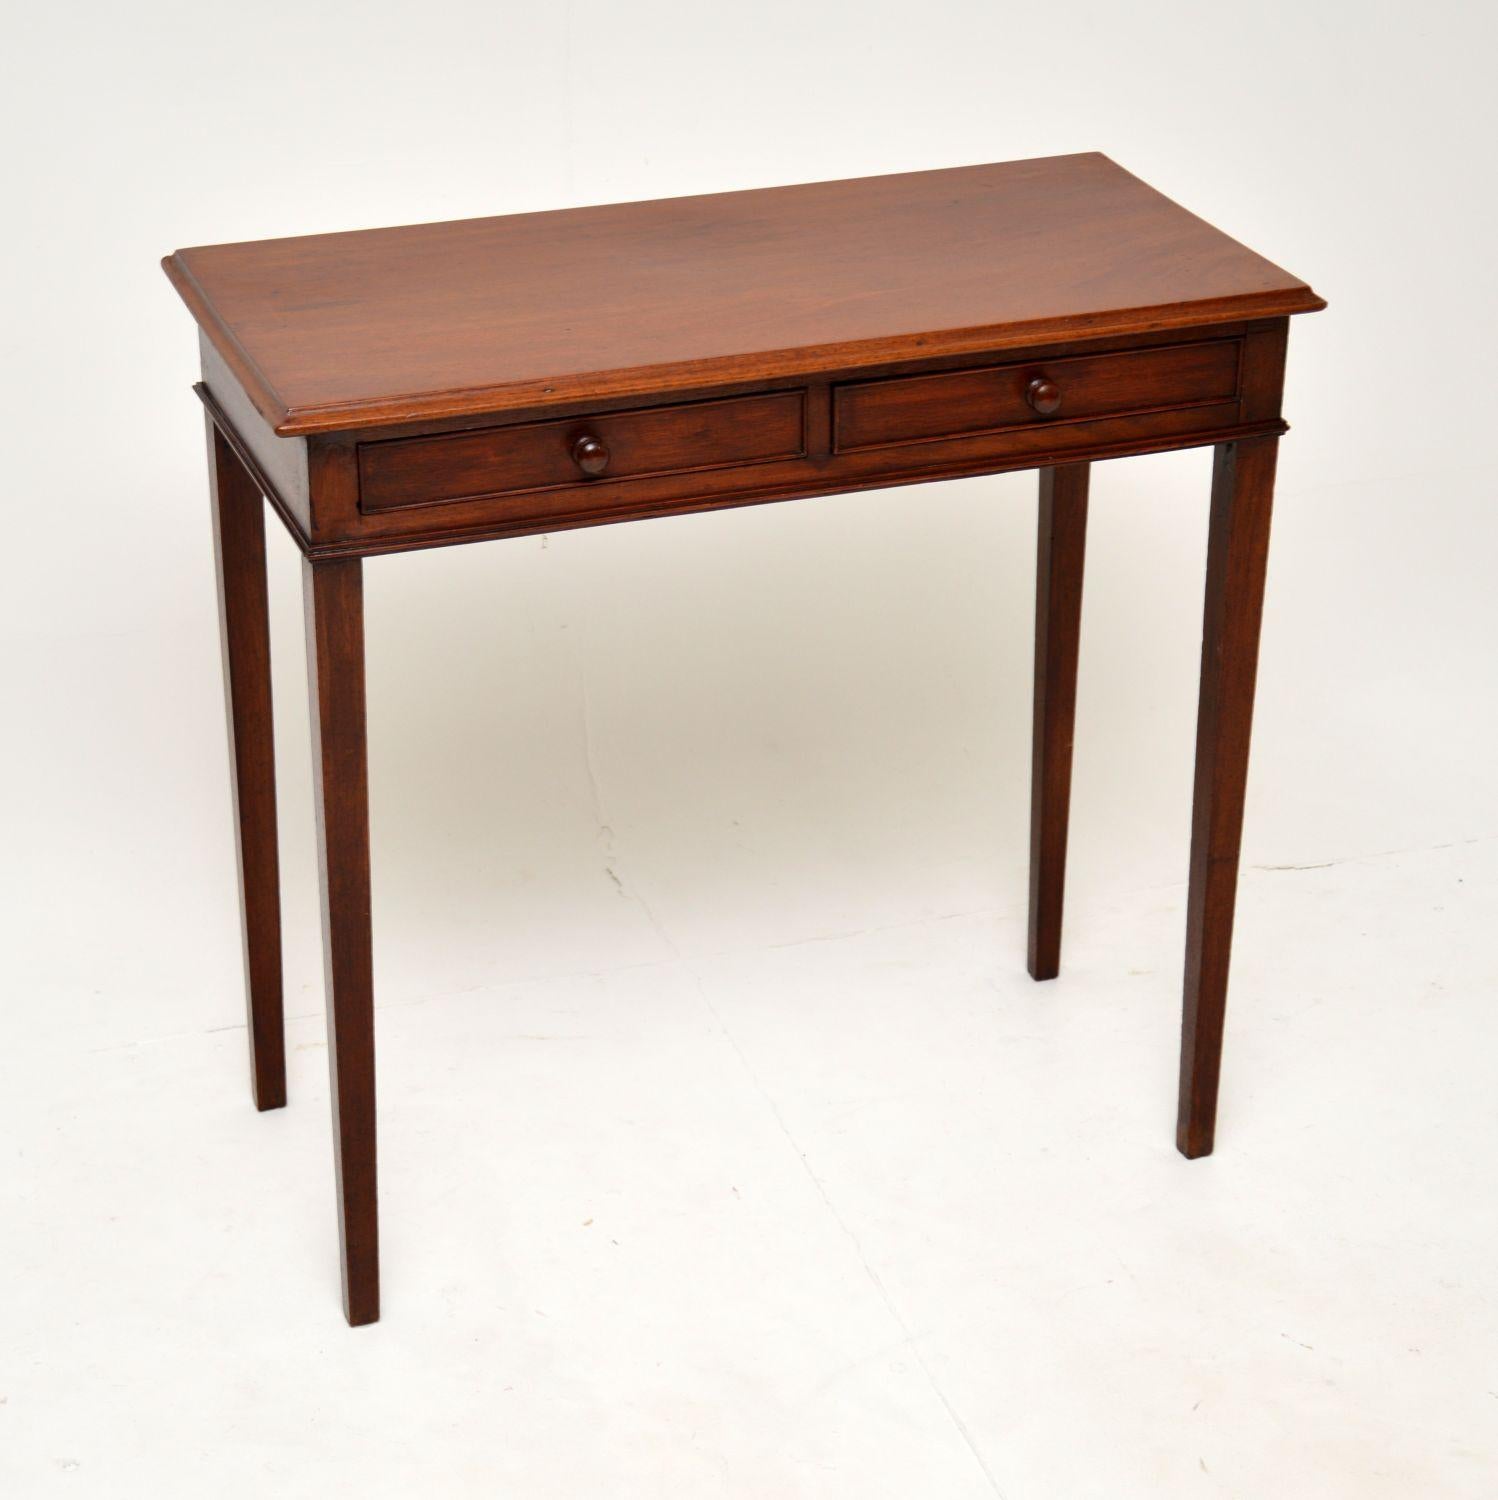 A wonderful little Georgian period writing table in solid wood. This was made in England, it dates from around 1790-1810 period.

It is beautifully made and is a very useful size. It is perfect for use as a small writing desk, or as a side / entry